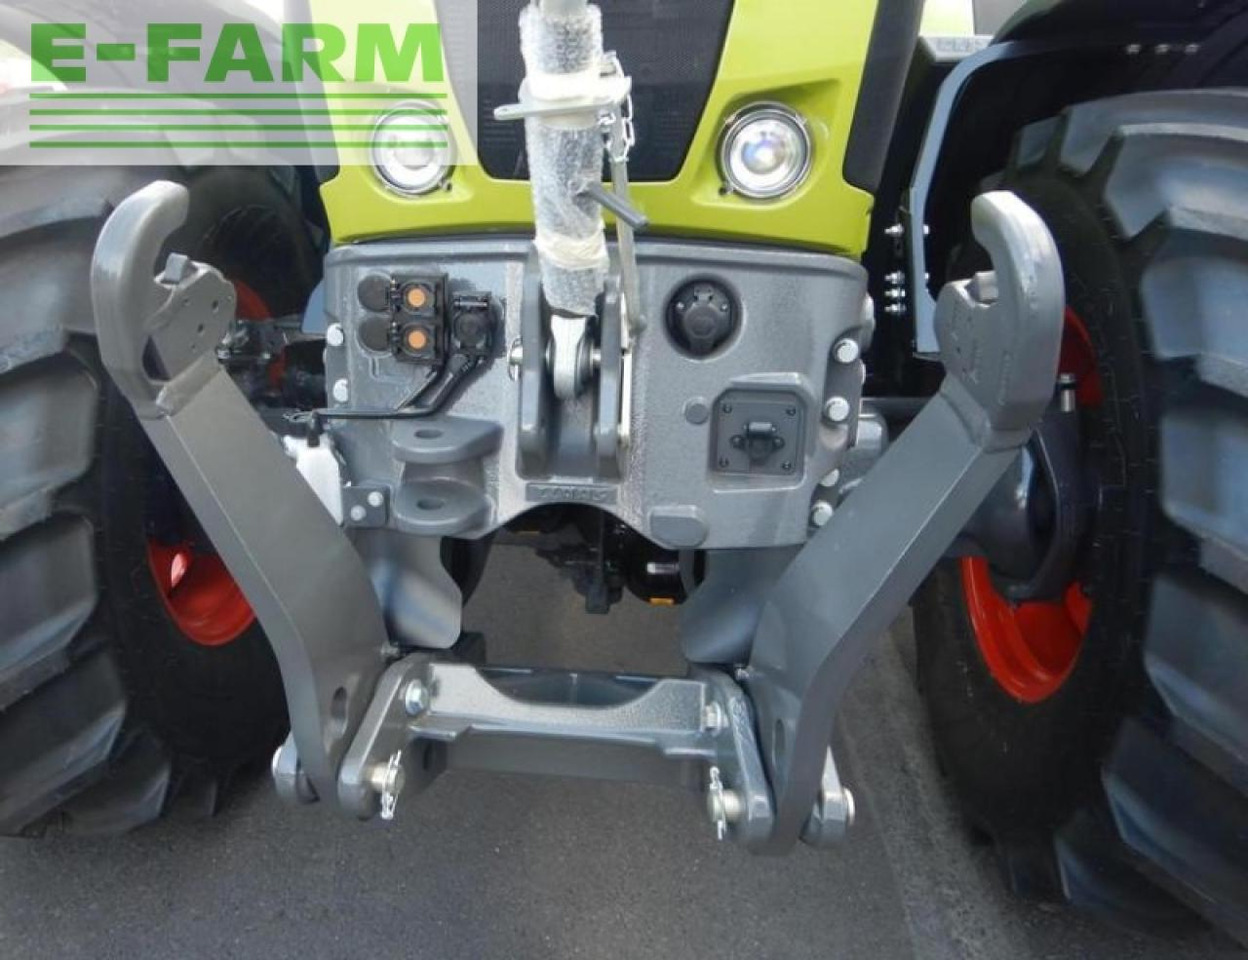 Farm tractor CLAAS axion 800 cis+ hexashift: picture 8